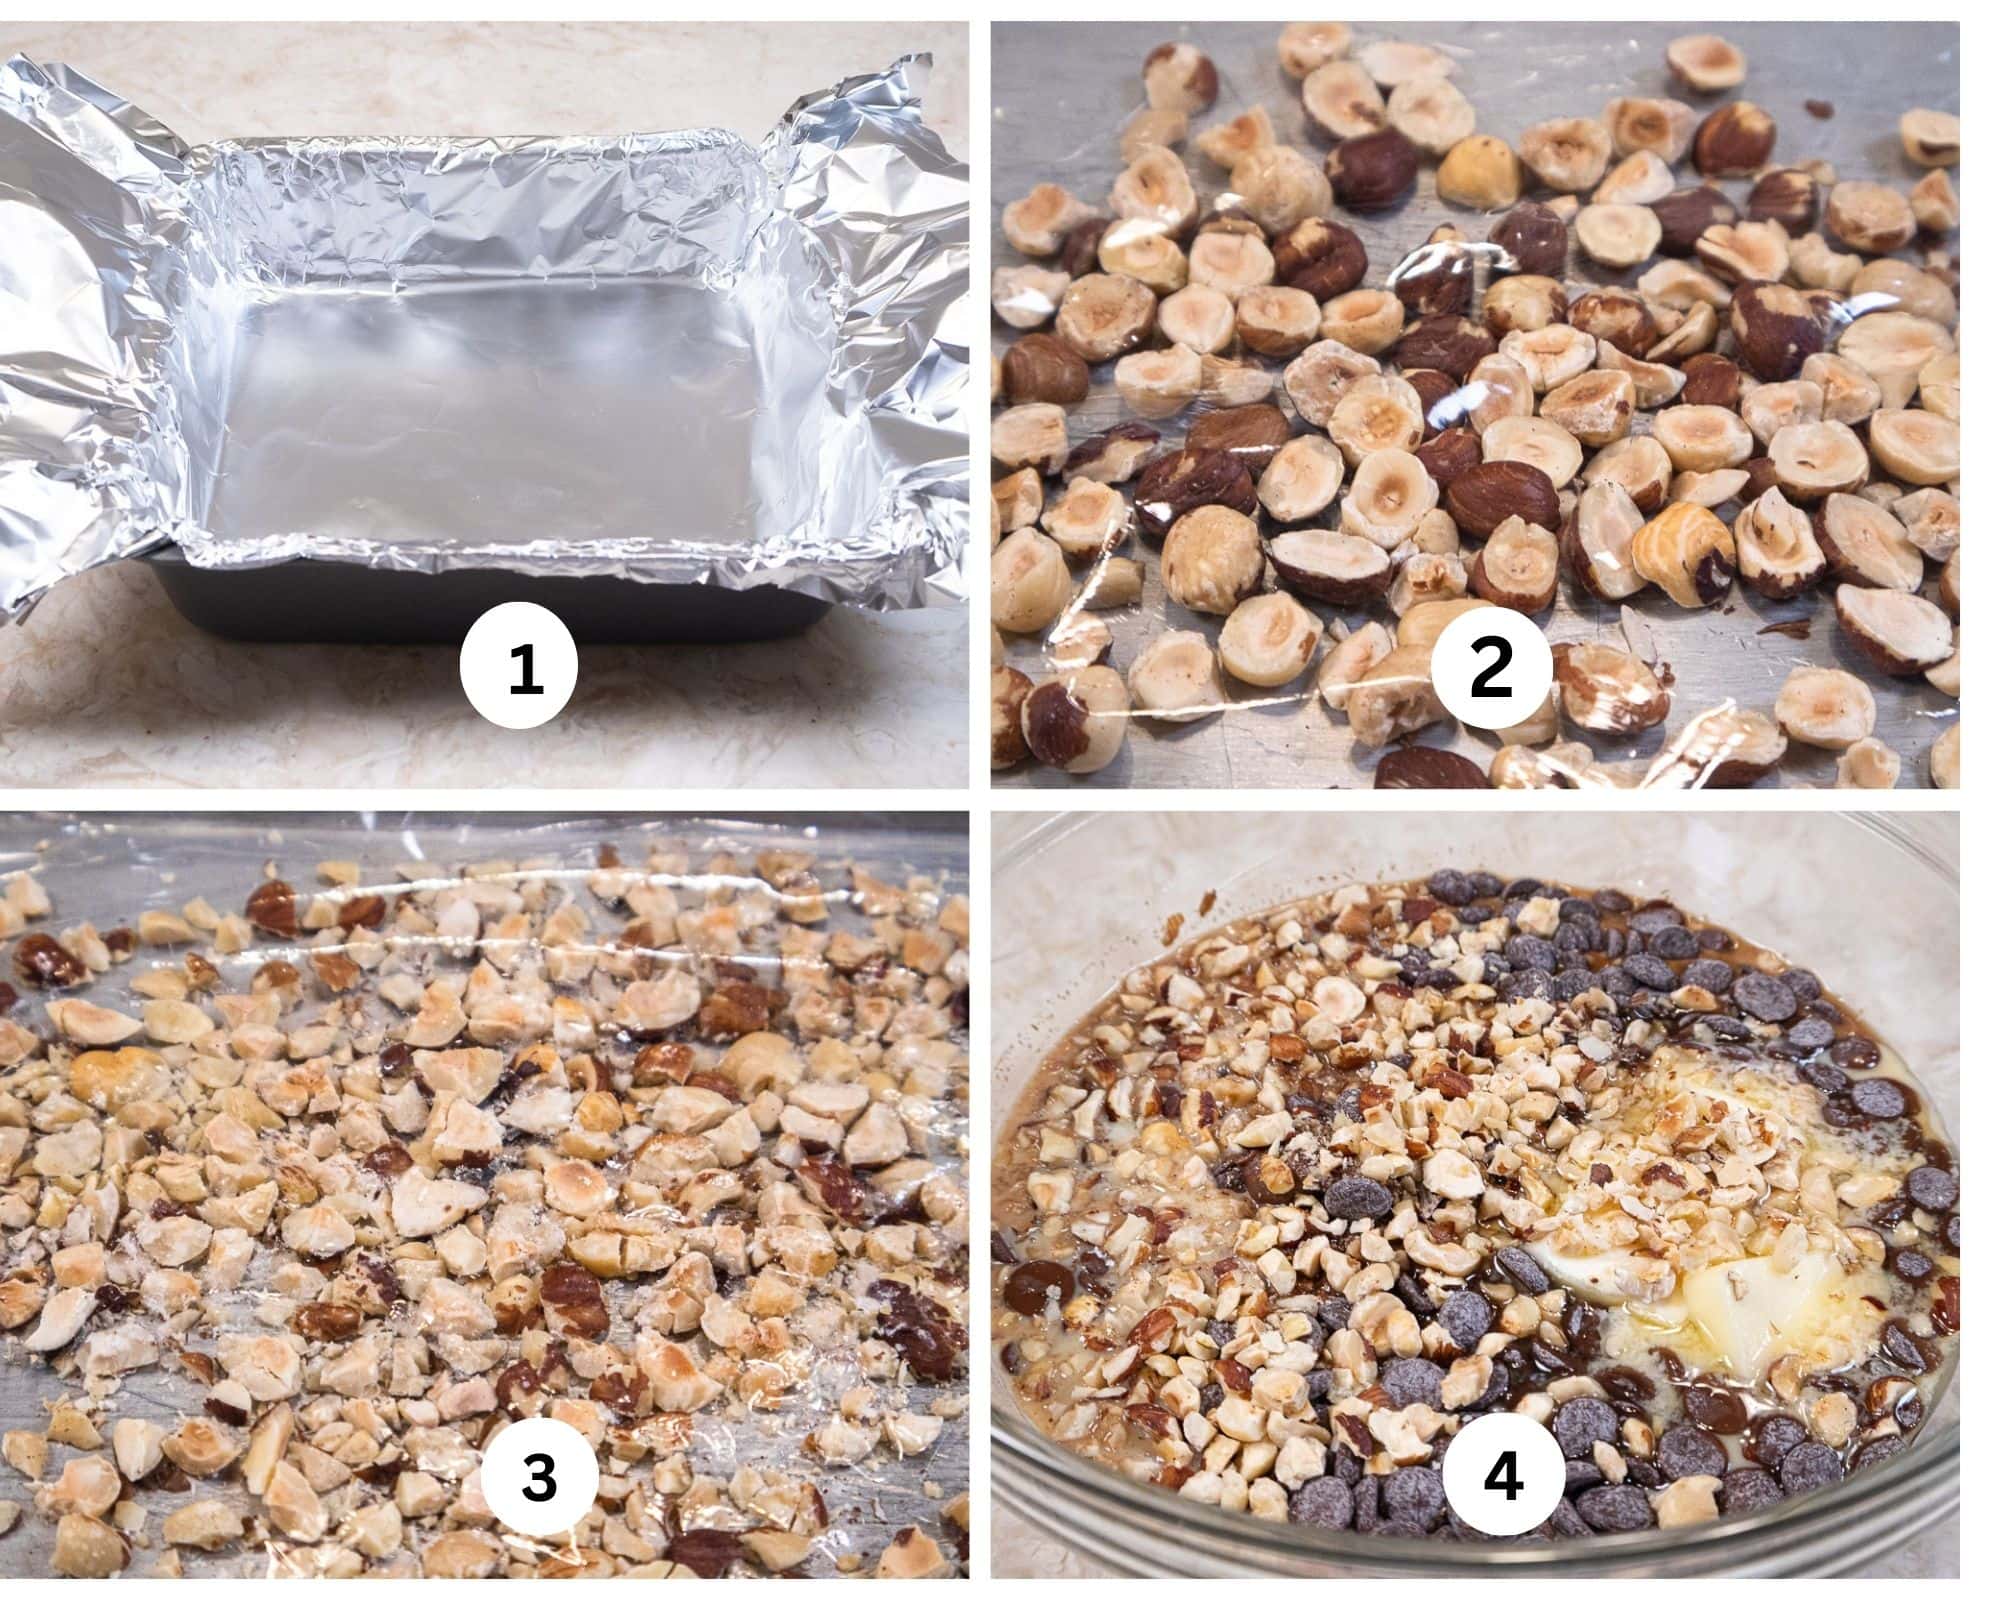 The first collage shows a square pan lined with foil, whole hazelnuts in a rimmed pan covered with film, the nuts are  chopped, and the ingredients in a large glass bowl.